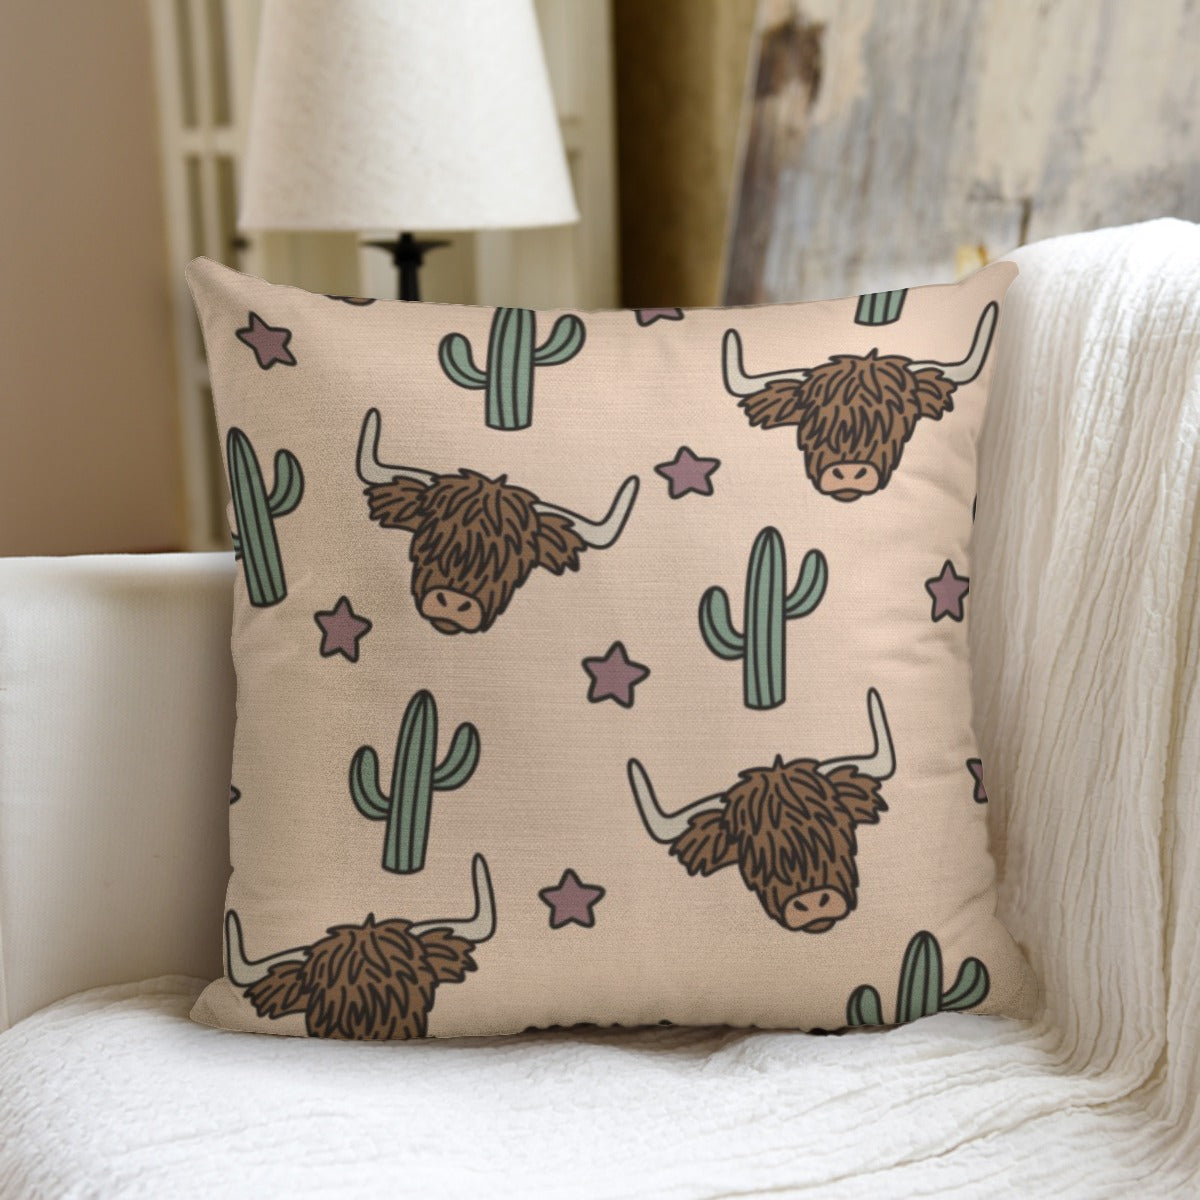 Highland Cactus Stars couch pillow with pillow Inserts